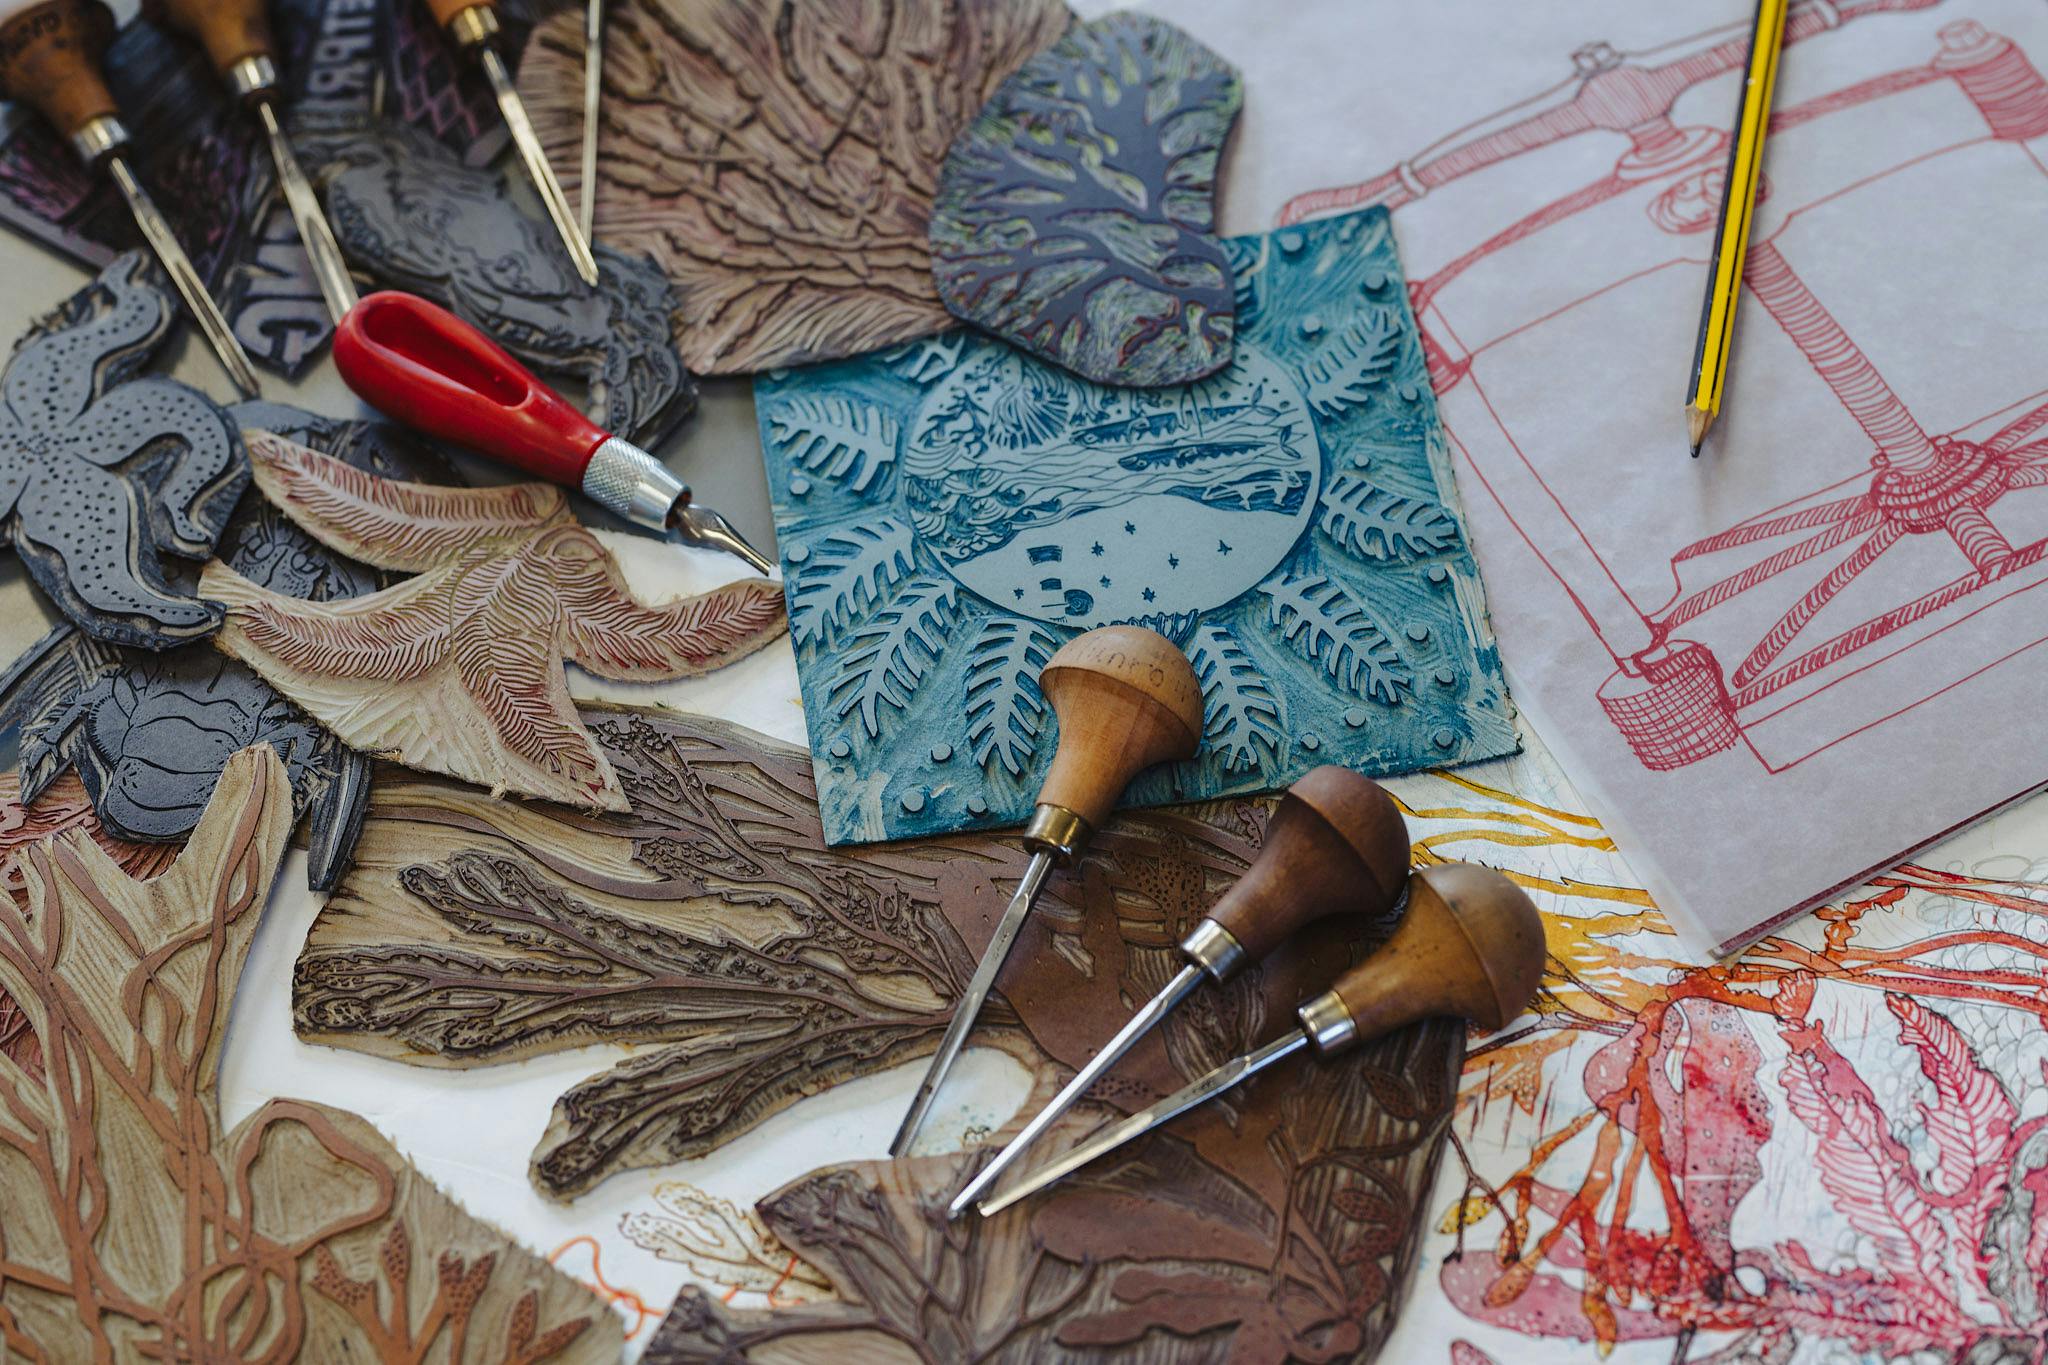 Tools used in lino cutting. Three wooden handles, sharp, pointed chisels lie on carved pieces of lino in the pattern of sea creatures and sea weed. Dommoore 2022 real ideas print in action 72dpi 9829